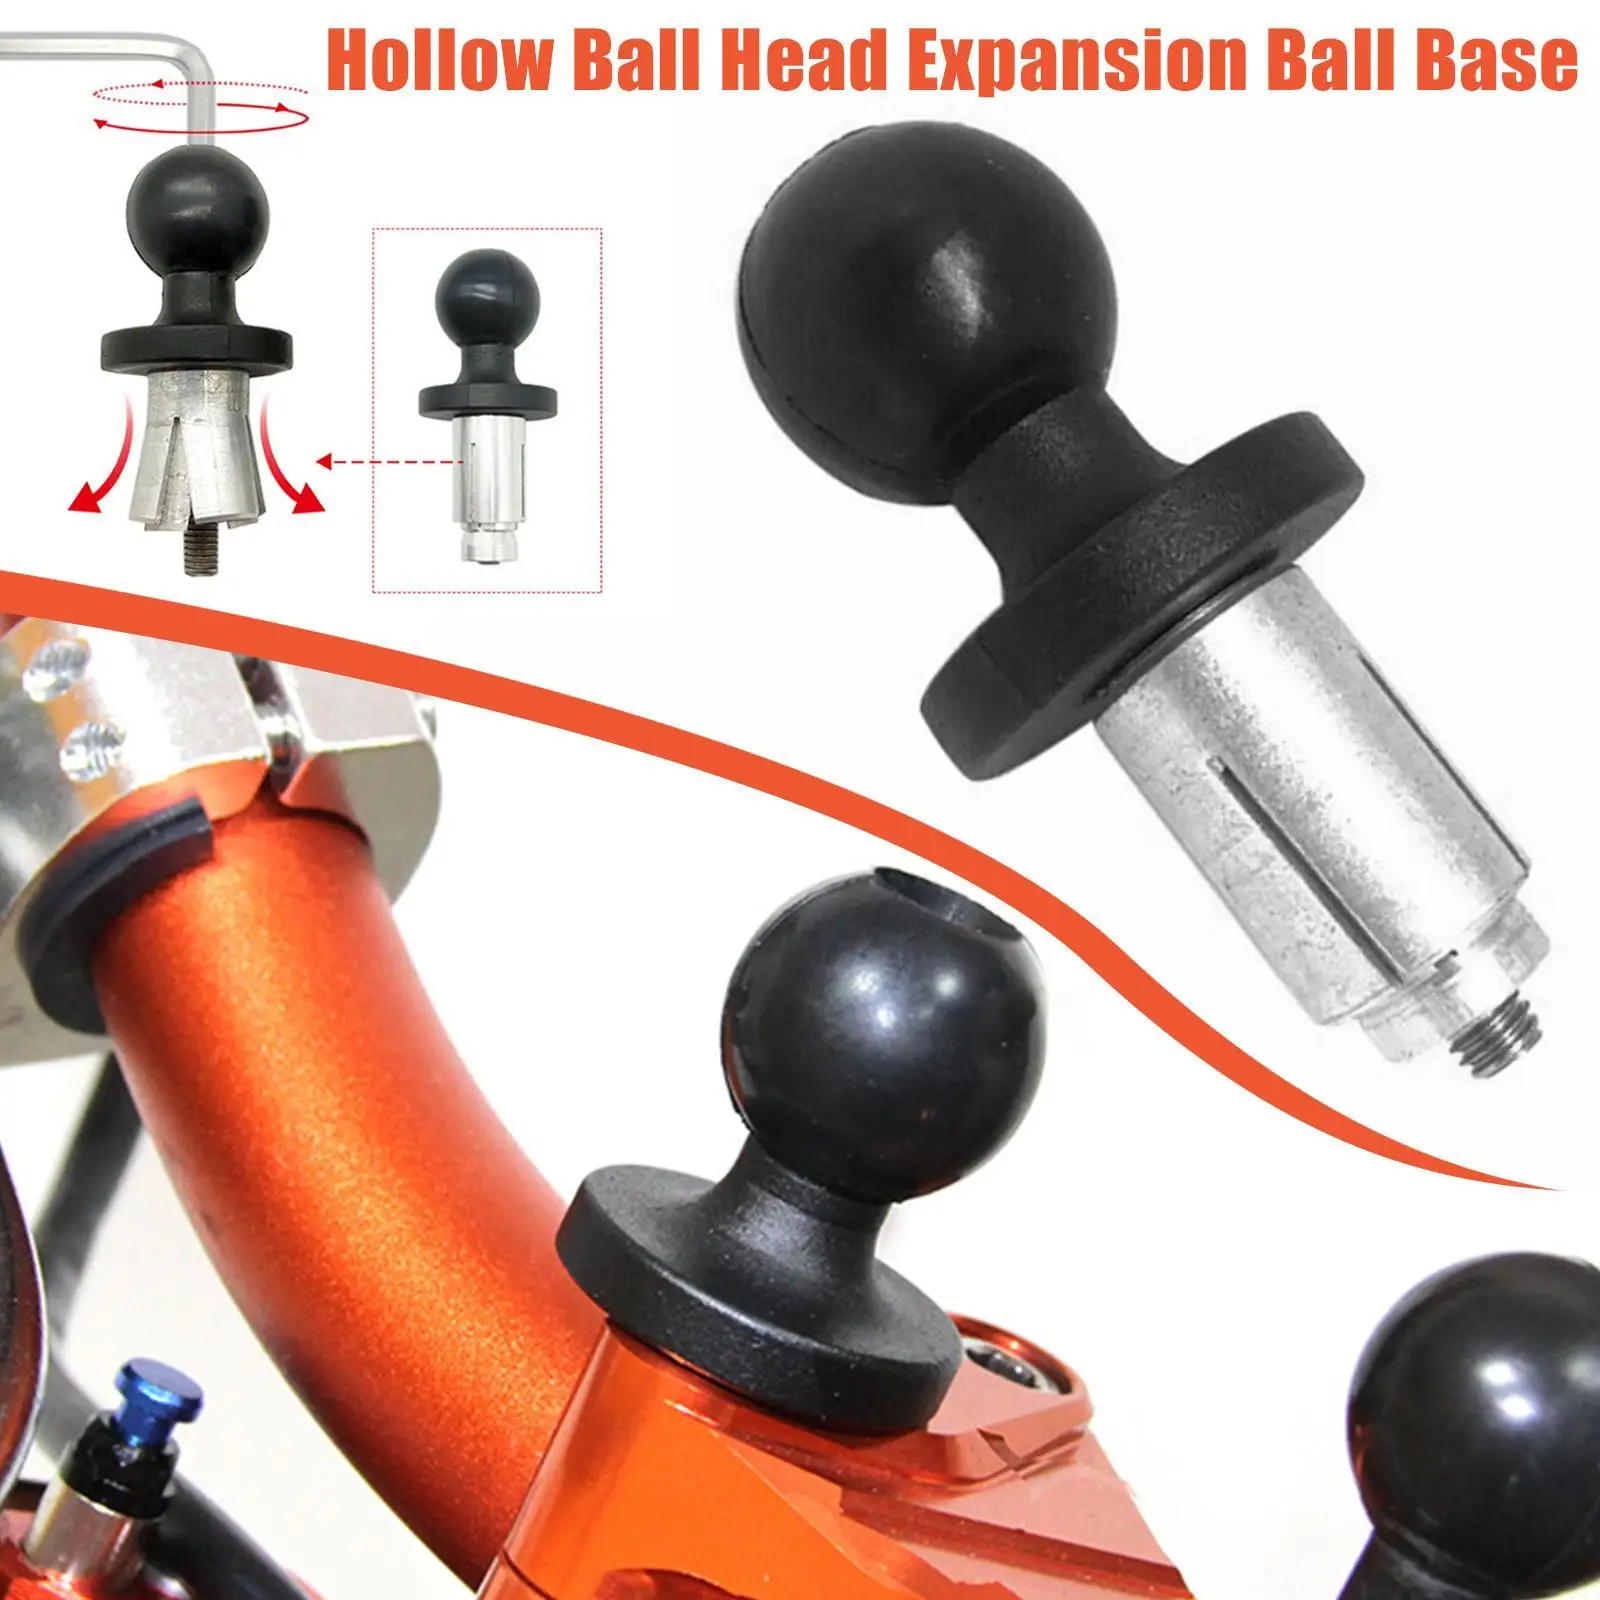 

Motorcycle Front Fork Stem Base Ball Adapter Rubber Base Head Compatible with RAM Mount for Gopro Ball Mount Adapter